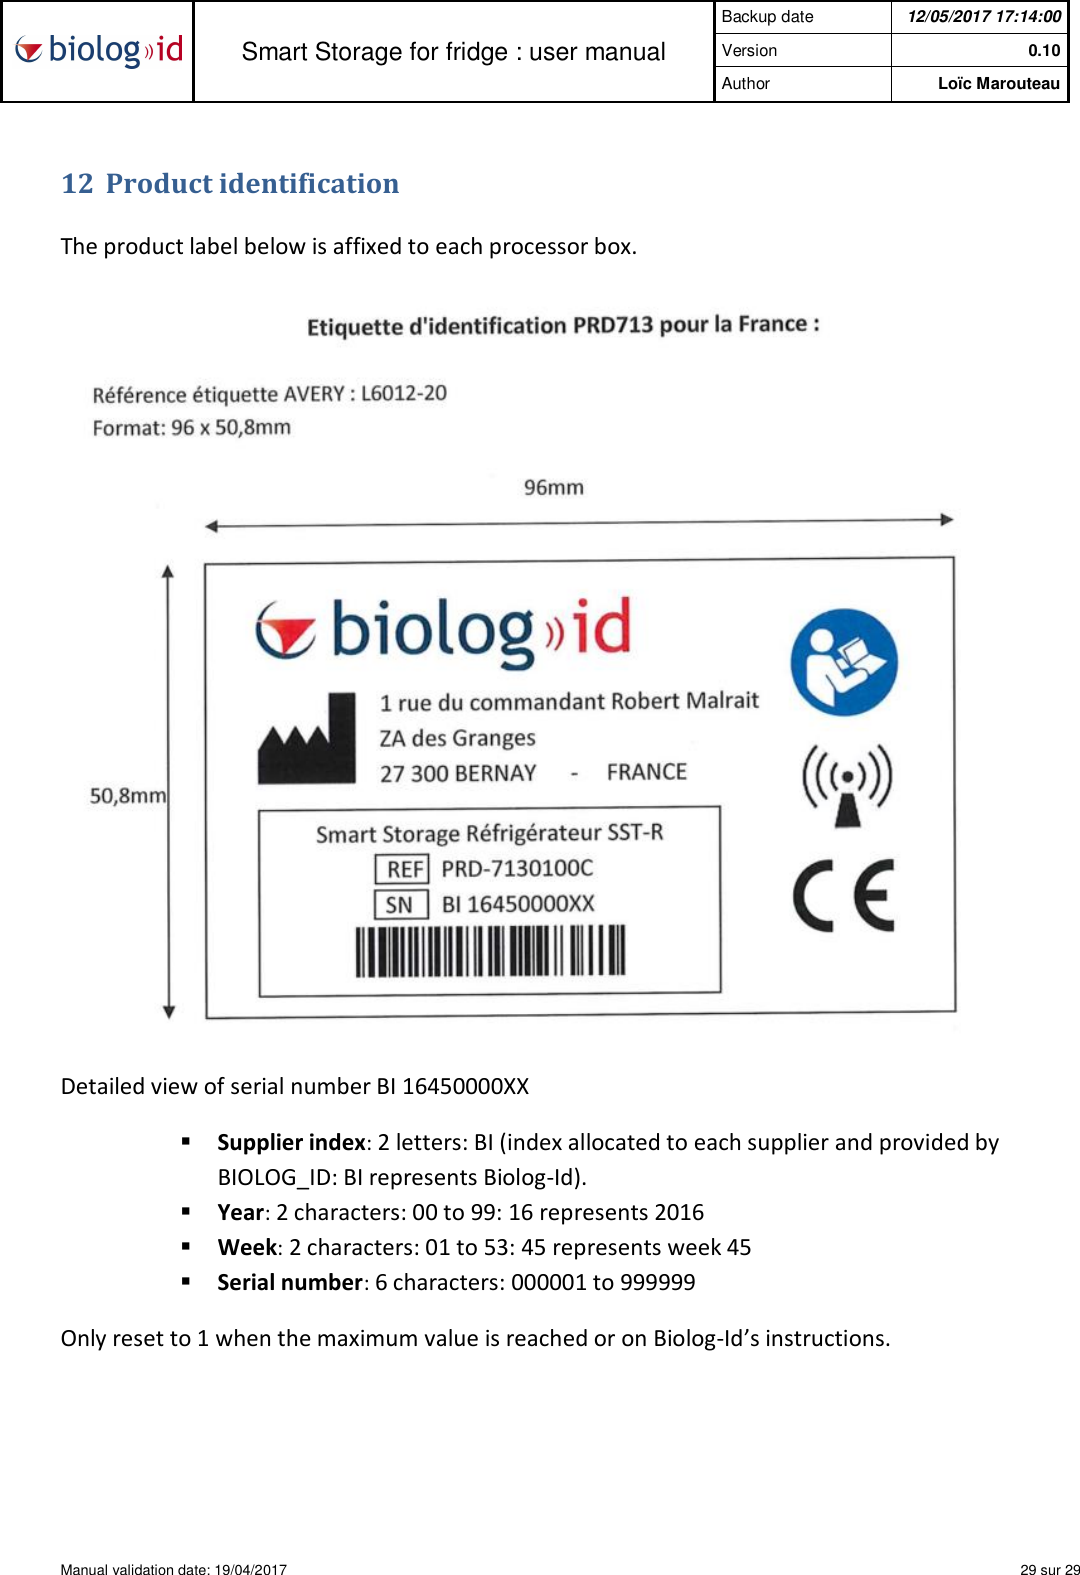  Smart Storage for fridge : user manual Backup date  12/05/2017 17:14:00 Version  0.10 Author   Loïc Marouteau  Manual validation date: 19/04/2017    29 sur 29   12 Product identification  The product label below is affixed to each processor box.   Detailed view of serial number BI 16450000XX § Supplier index: 2 letters: BI (index allocated to each supplier and provided by BIOLOG_ID: BI represents Biolog-Id). § Year: 2 characters: 00 to 99: 16 represents 2016 § Week: 2 characters: 01 to 53: 45 represents week 45  § Serial number: 6 characters: 000001 to 999999  Only reset to 1 when the maximum value is reached or on Biolog-Id’s instructions.  